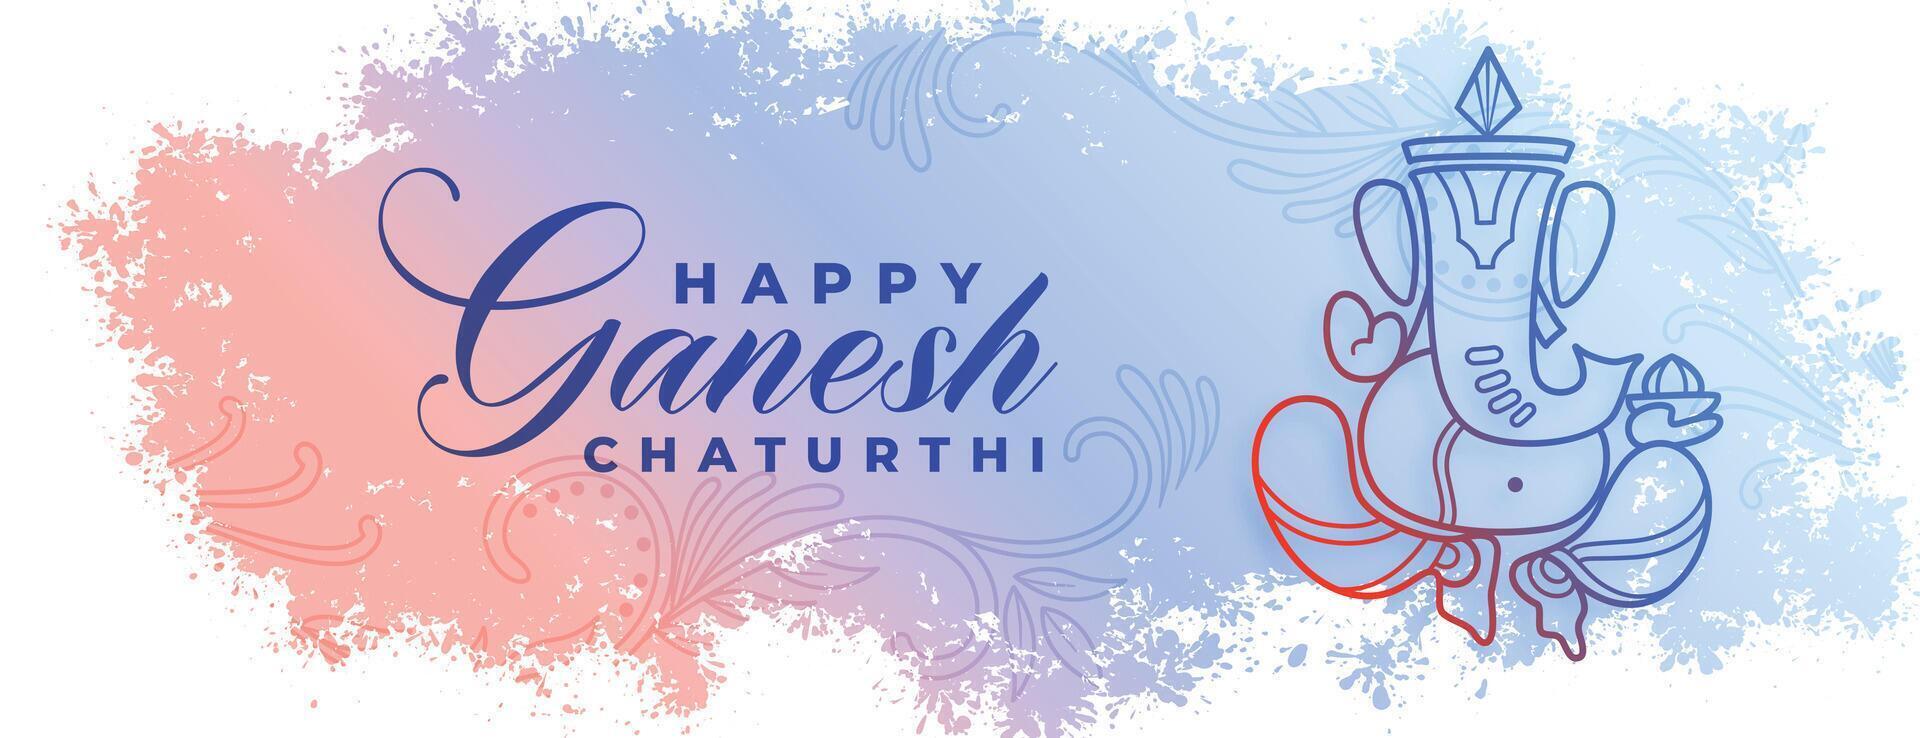 elegant lord ganesha chaturthi celebration banner in watercolor style vector